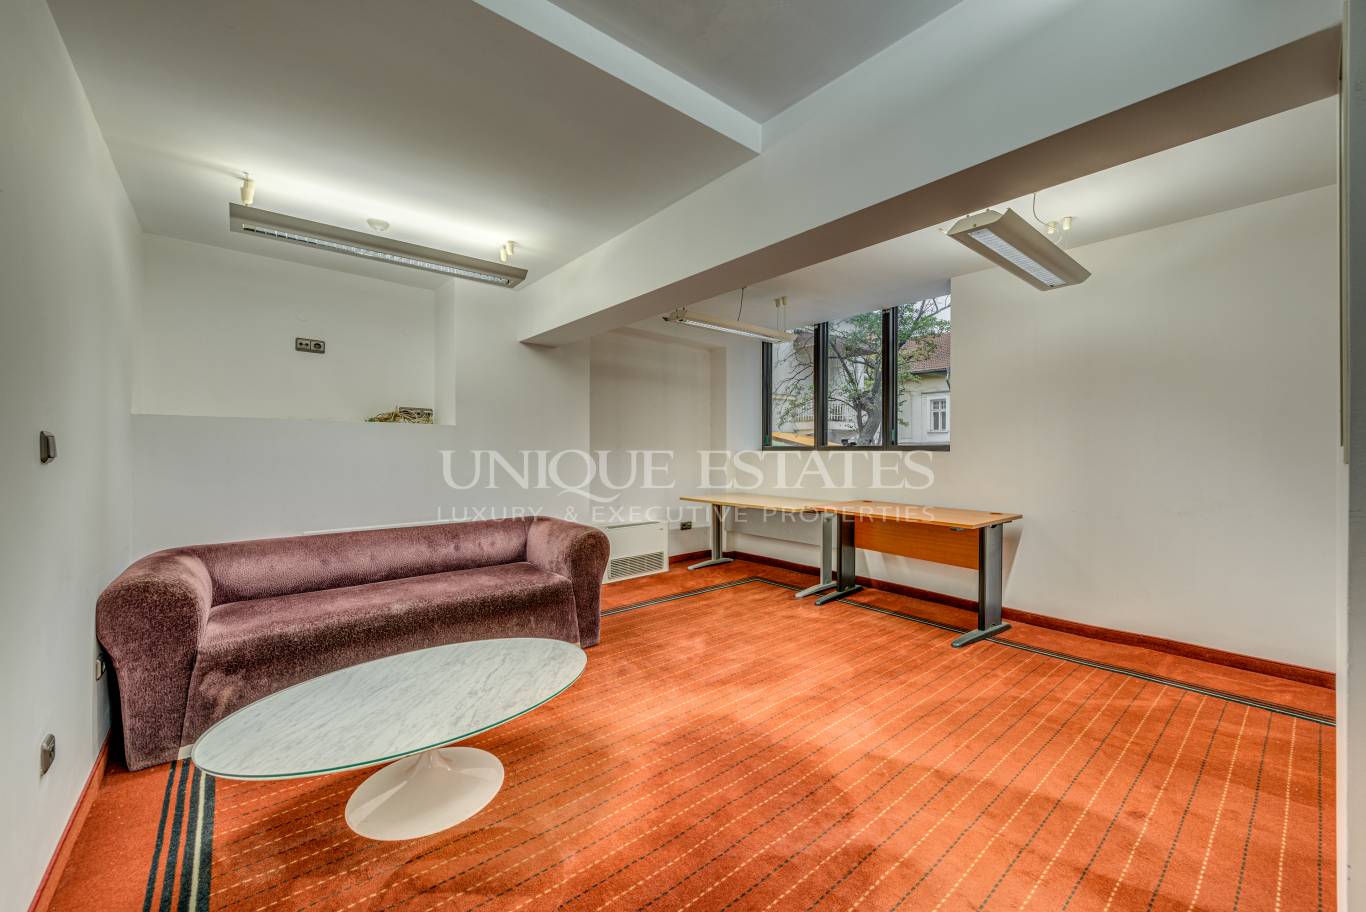 Office for rent in Sofia, Downtown with listing ID: K13585 - image 9